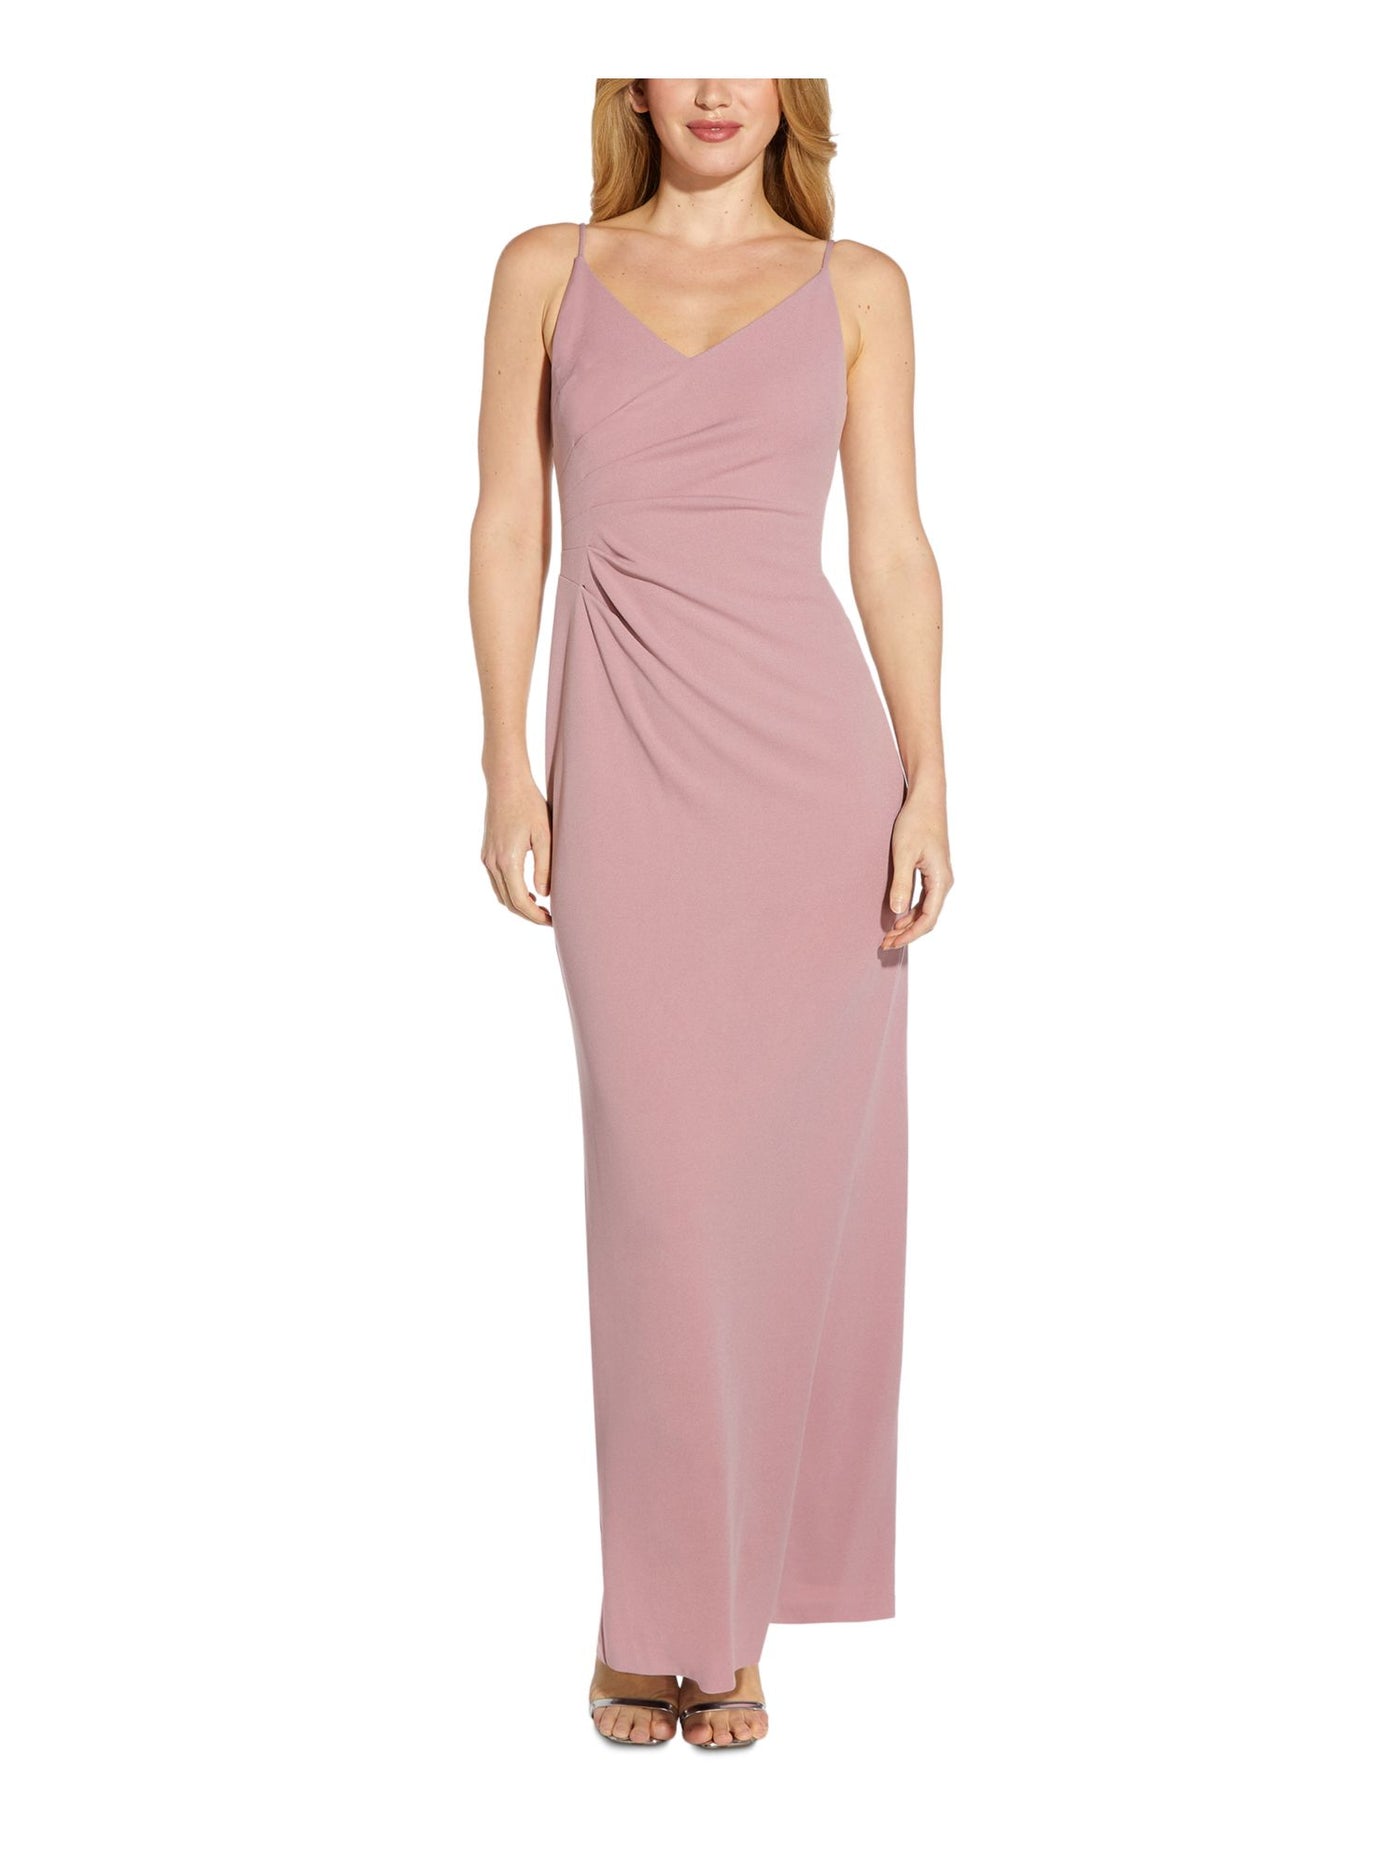 ADRIANNA PAPELL Womens Pink Stretch Ruched Zippered Column Silhouette Back Slit Spaghetti Strap V Neck Full-Length Evening Dress 8